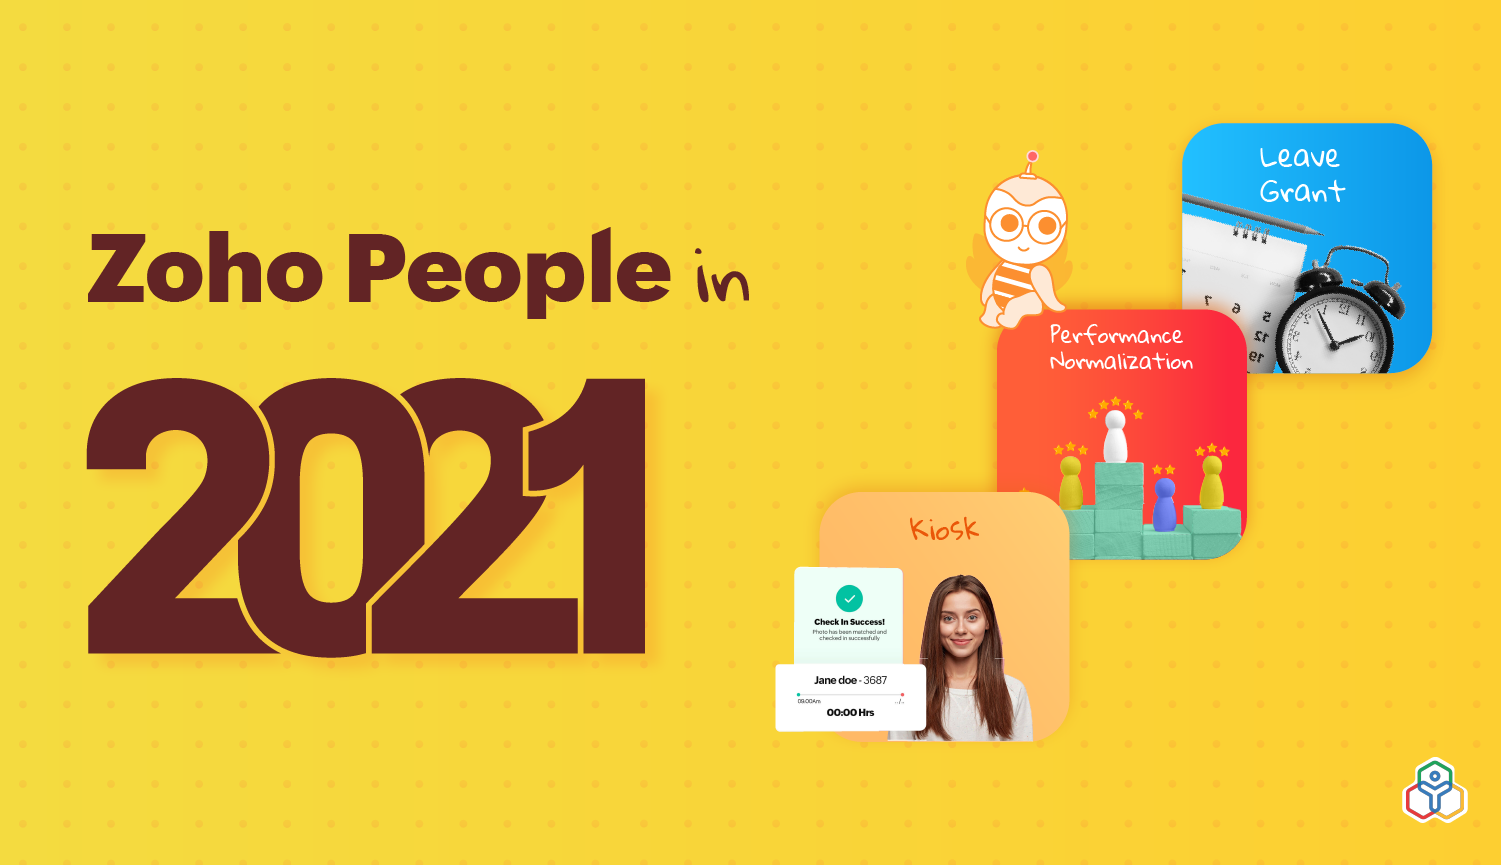 A look at Zoho People in 2021